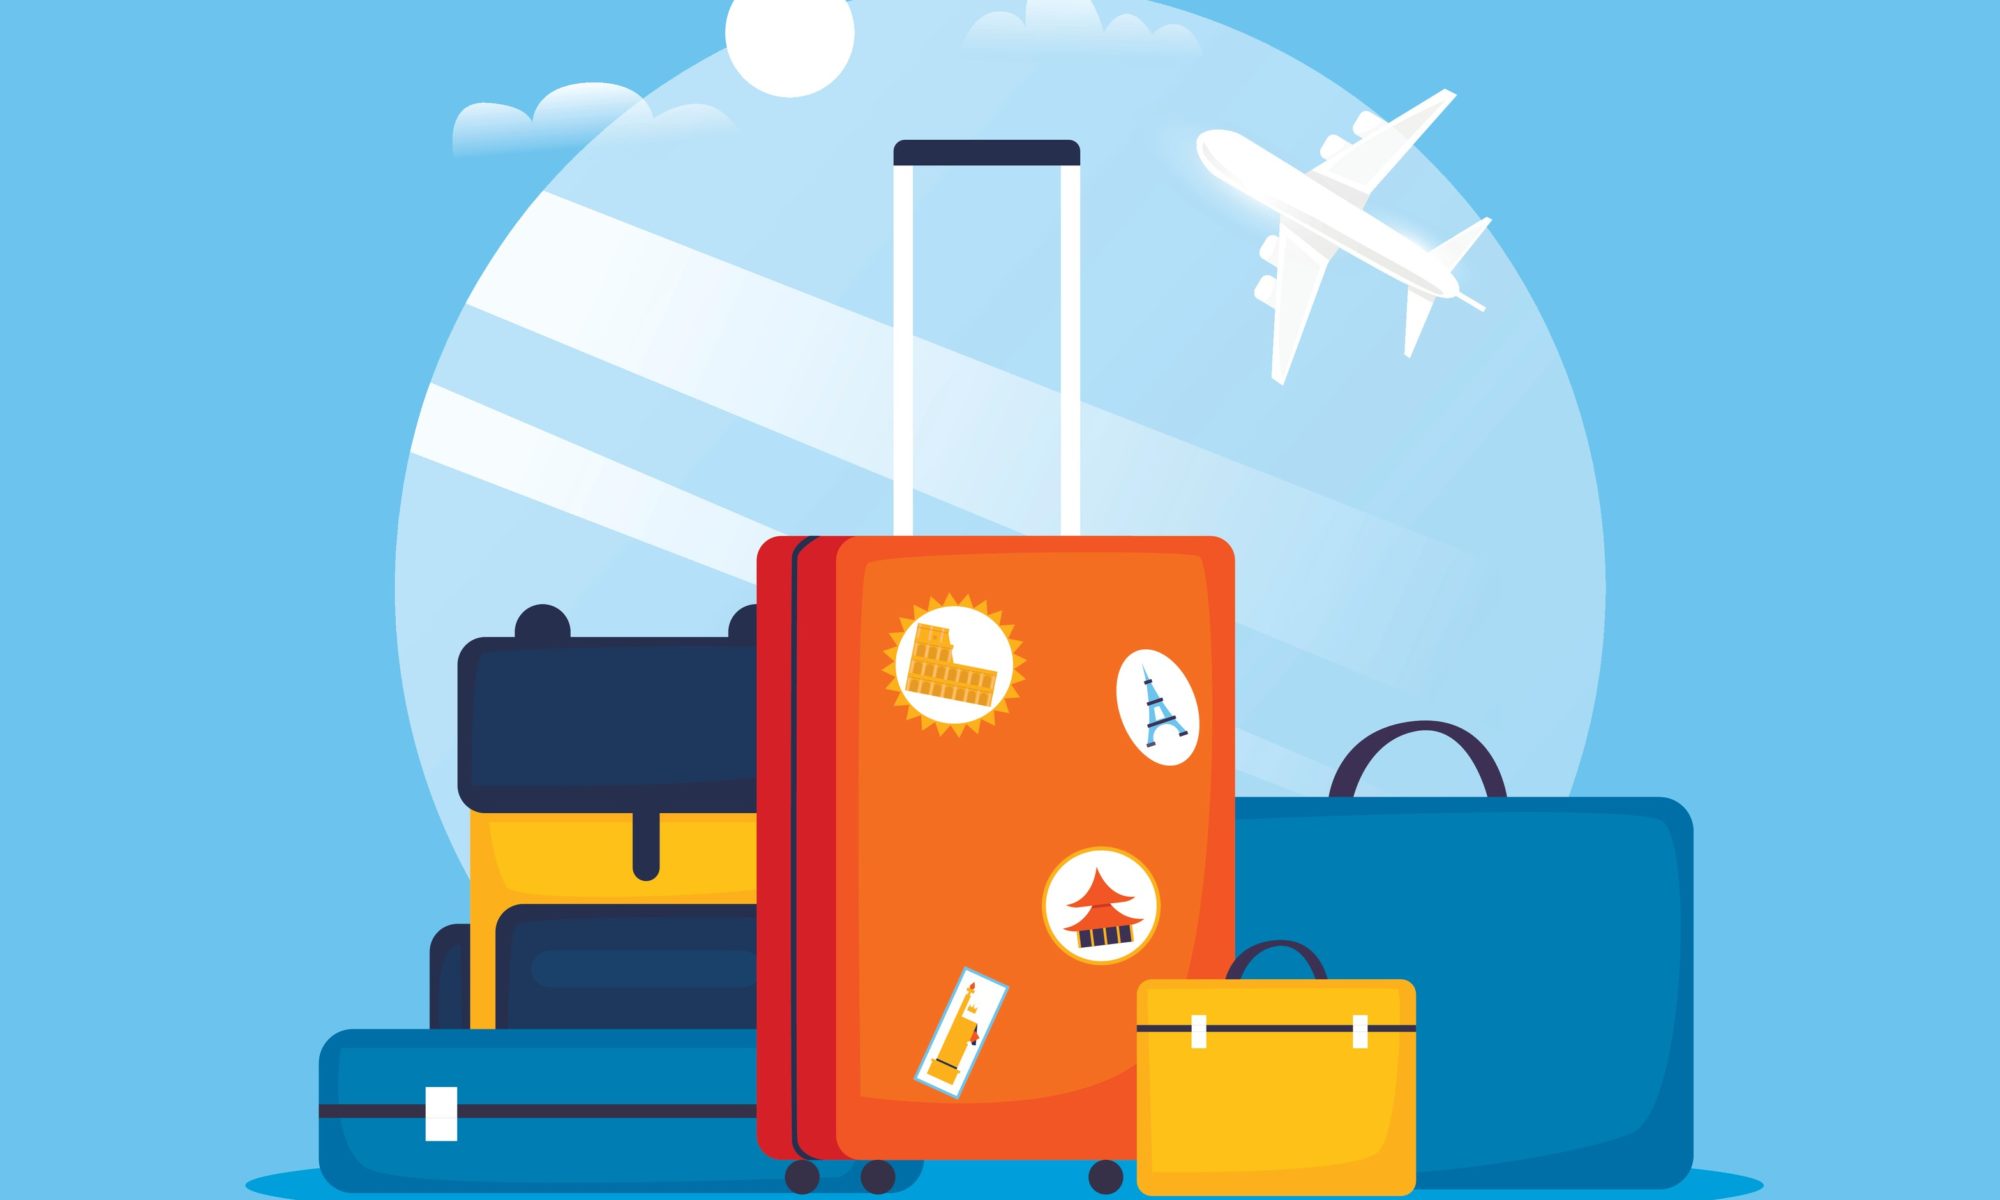 PLANNING TO TRAVEL? HERE’S WHAT YOUR TRAVEL CHECKLIST SHOULD INCLUDE